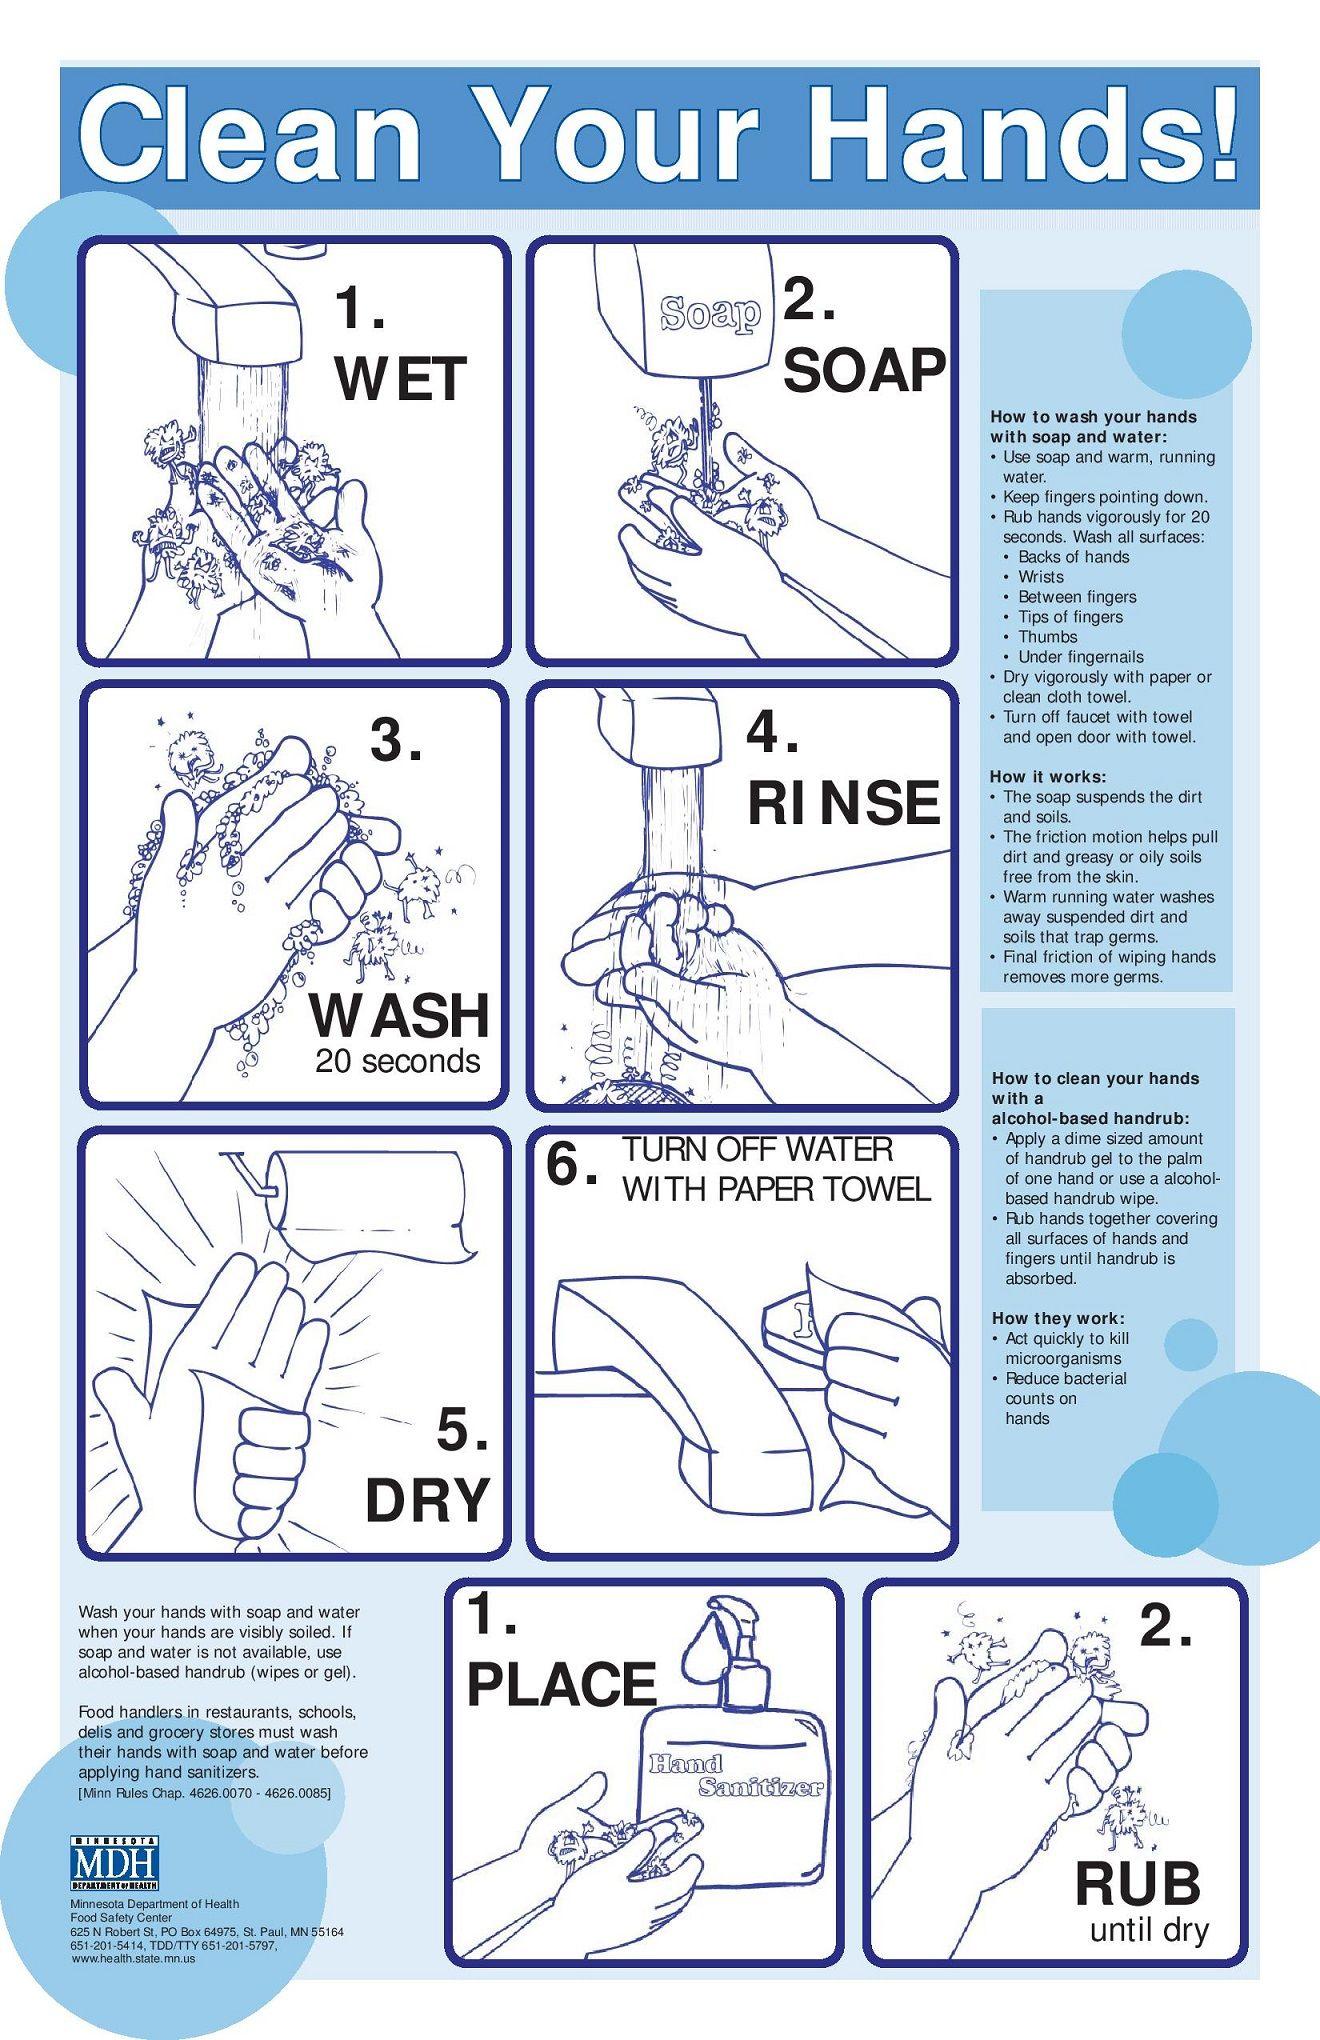 hand washing hygiene poster clean your hands hand washing poster